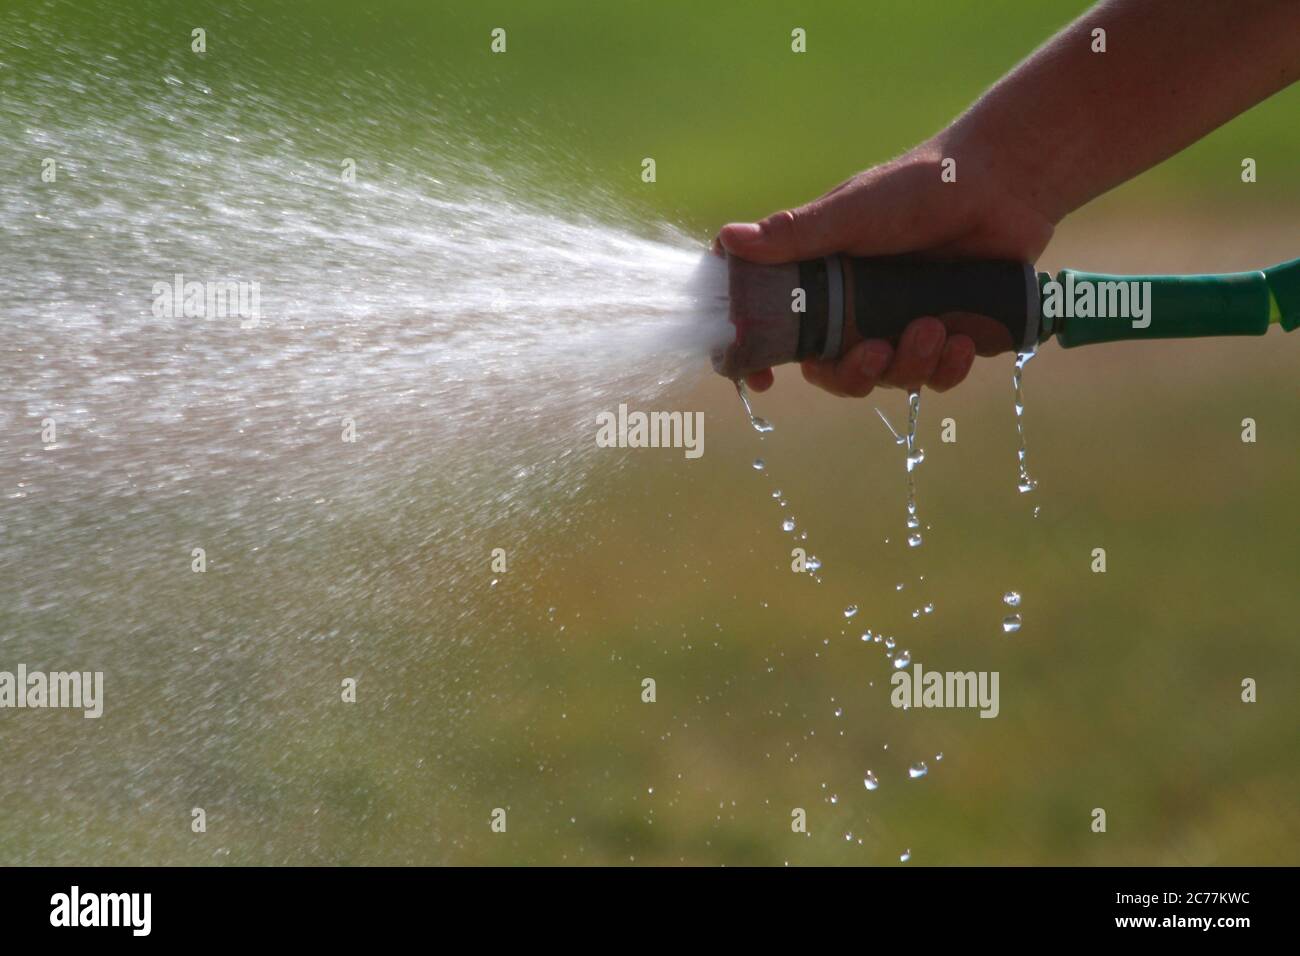 A man sprays water from a hose in a close-up photograph. Stock Photo